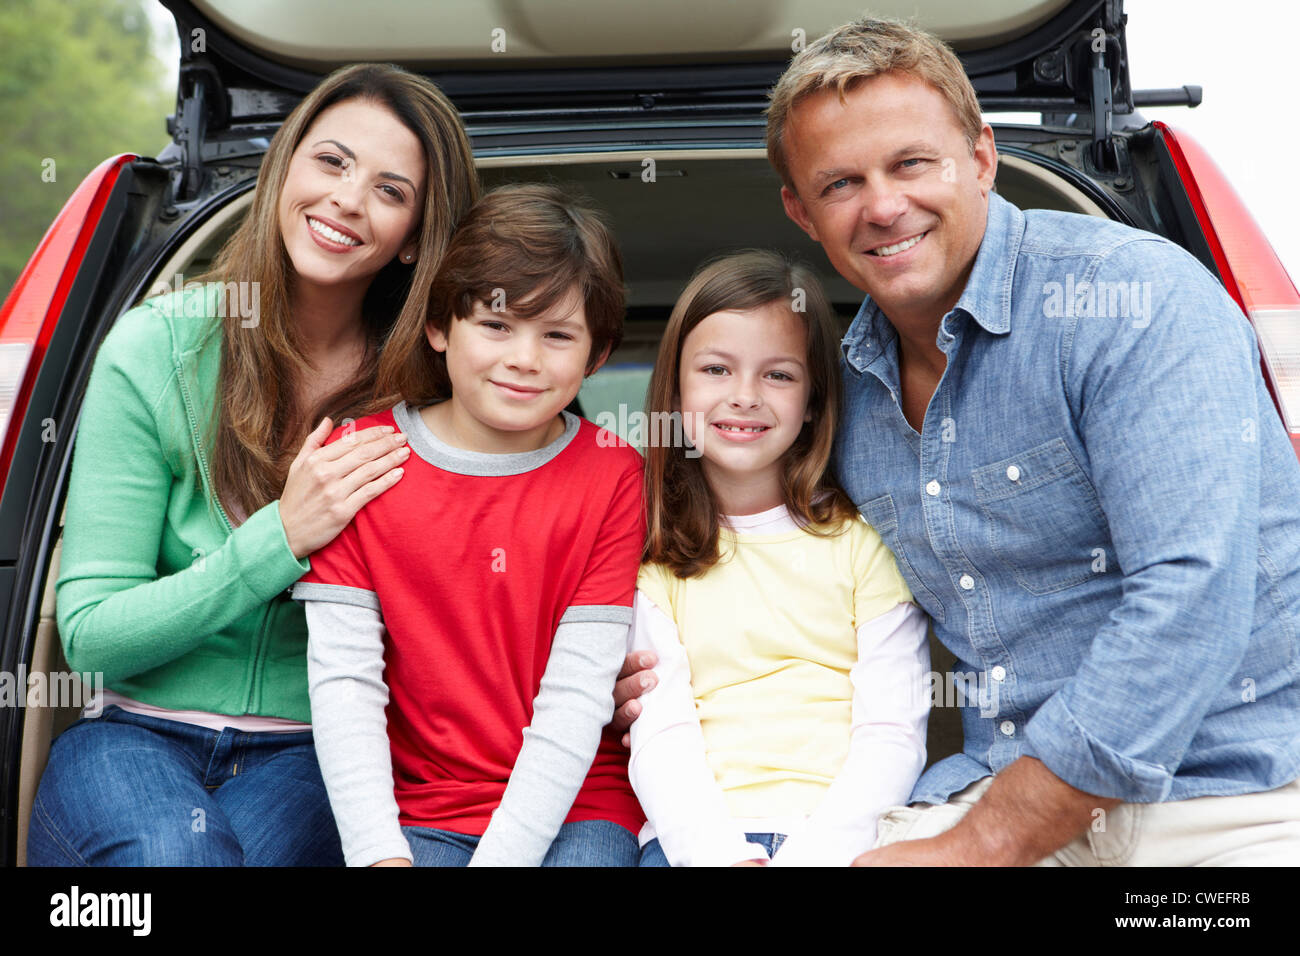 Family outdoors with car Stock Photo